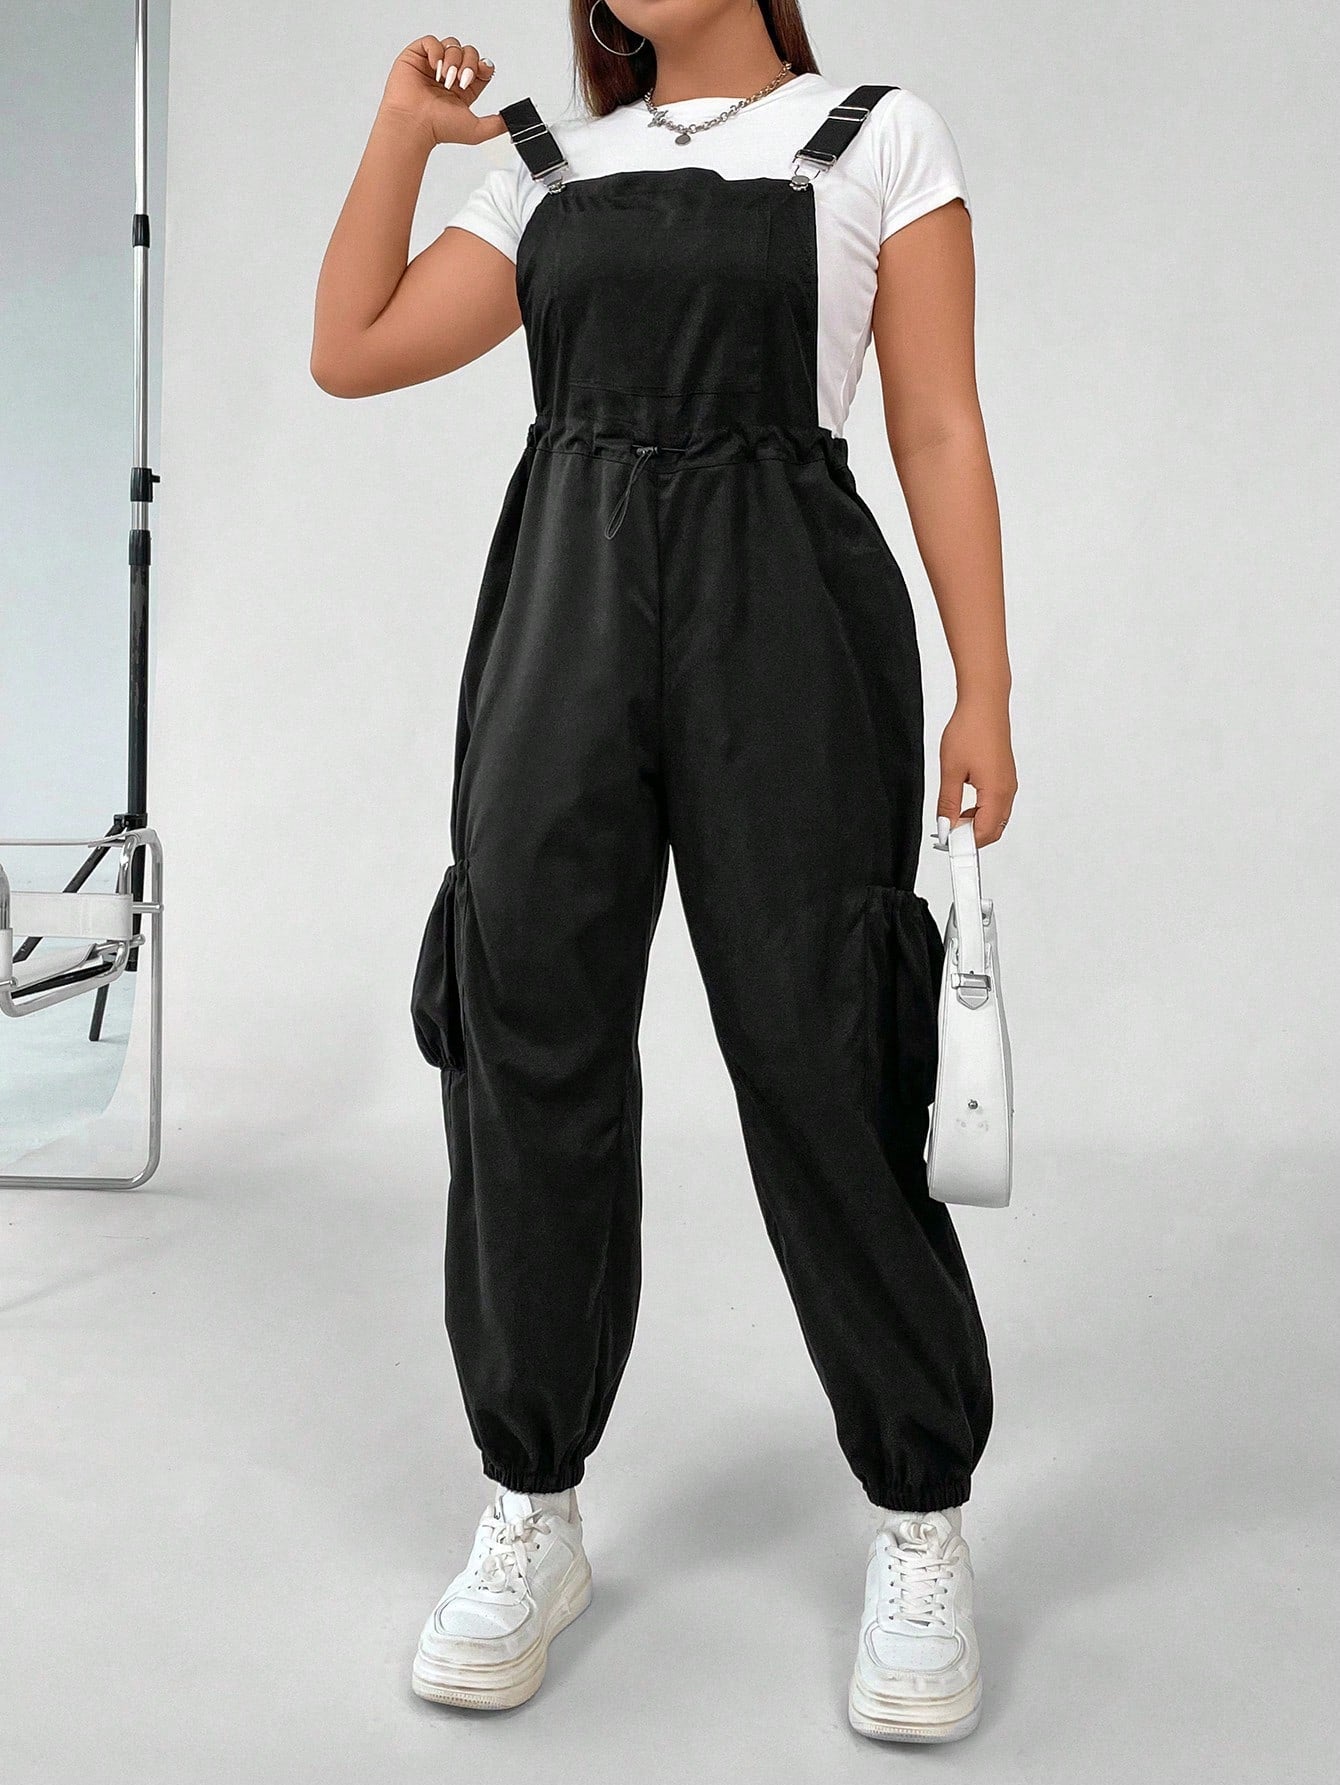 Plus Drawstring Waist Pocket Side Pinafore Jumpsuit Without Tee